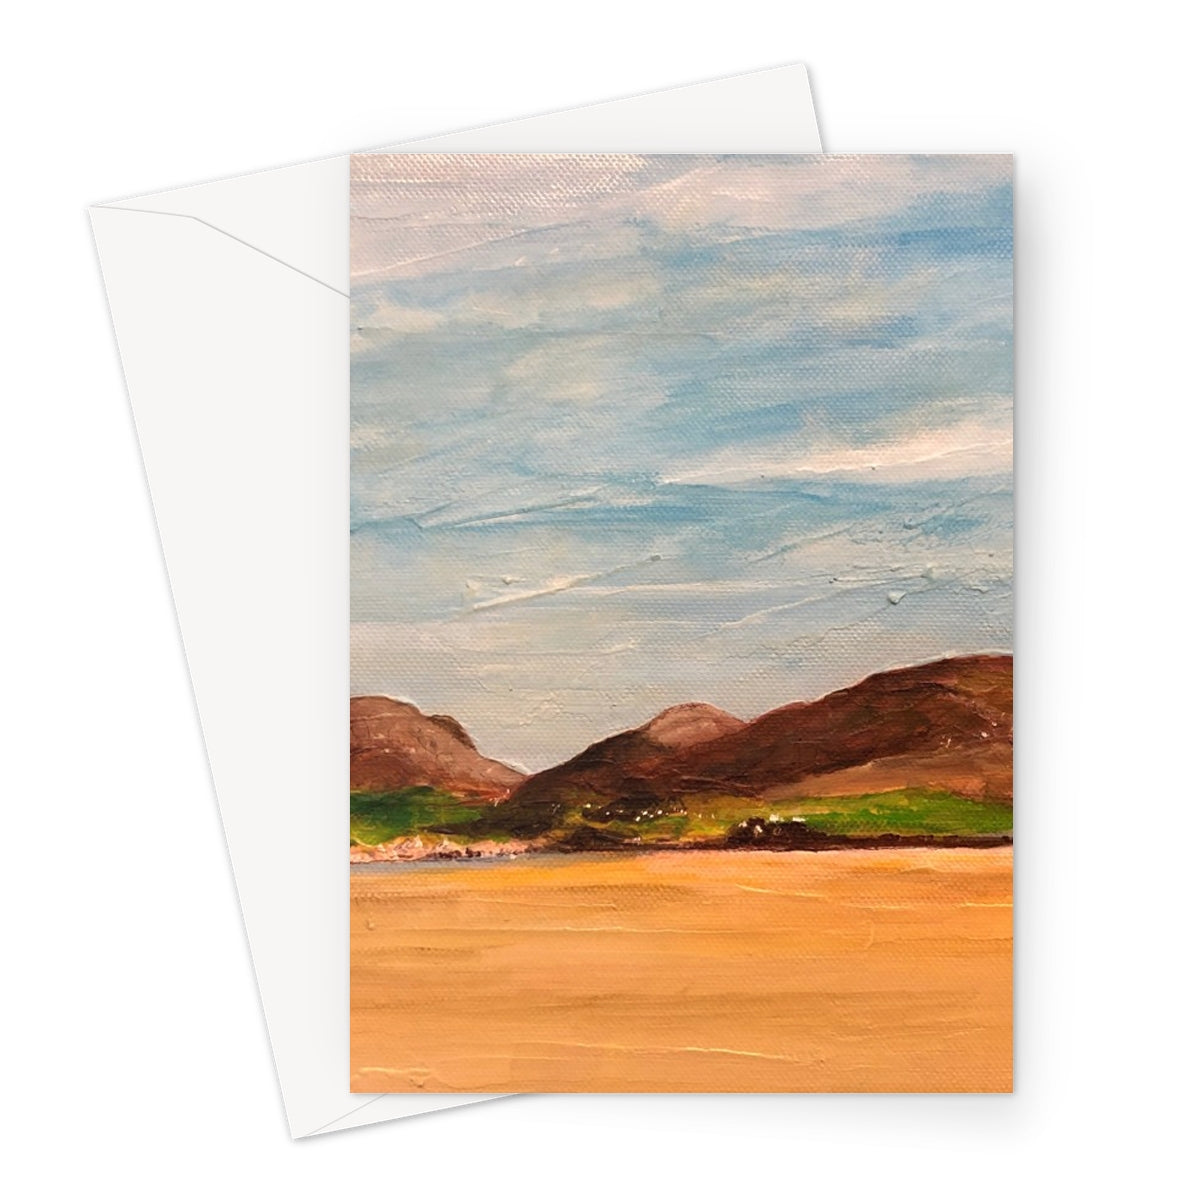 Uig Sands Lewis Art Gifts Greeting Card-Greetings Cards-Hebridean Islands Art Gallery-A5 Portrait-1 Card-Paintings, Prints, Homeware, Art Gifts From Scotland By Scottish Artist Kevin Hunter